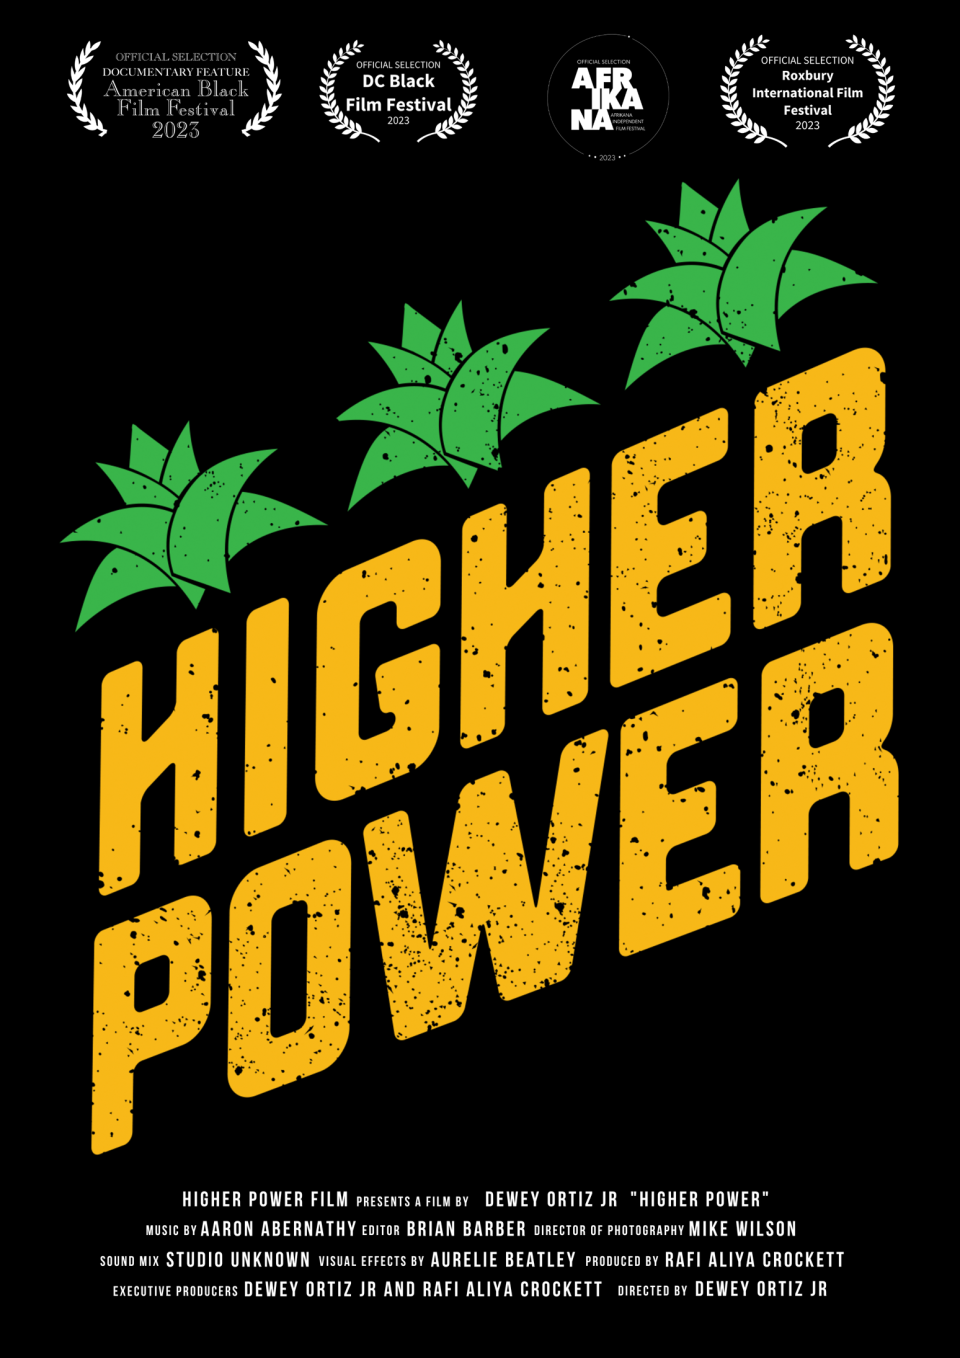 The title of the film, "Higher Power" is in bold, blocky yellow letters diagonally taking up the full frame. Above the words are three green plants. The background is black. 